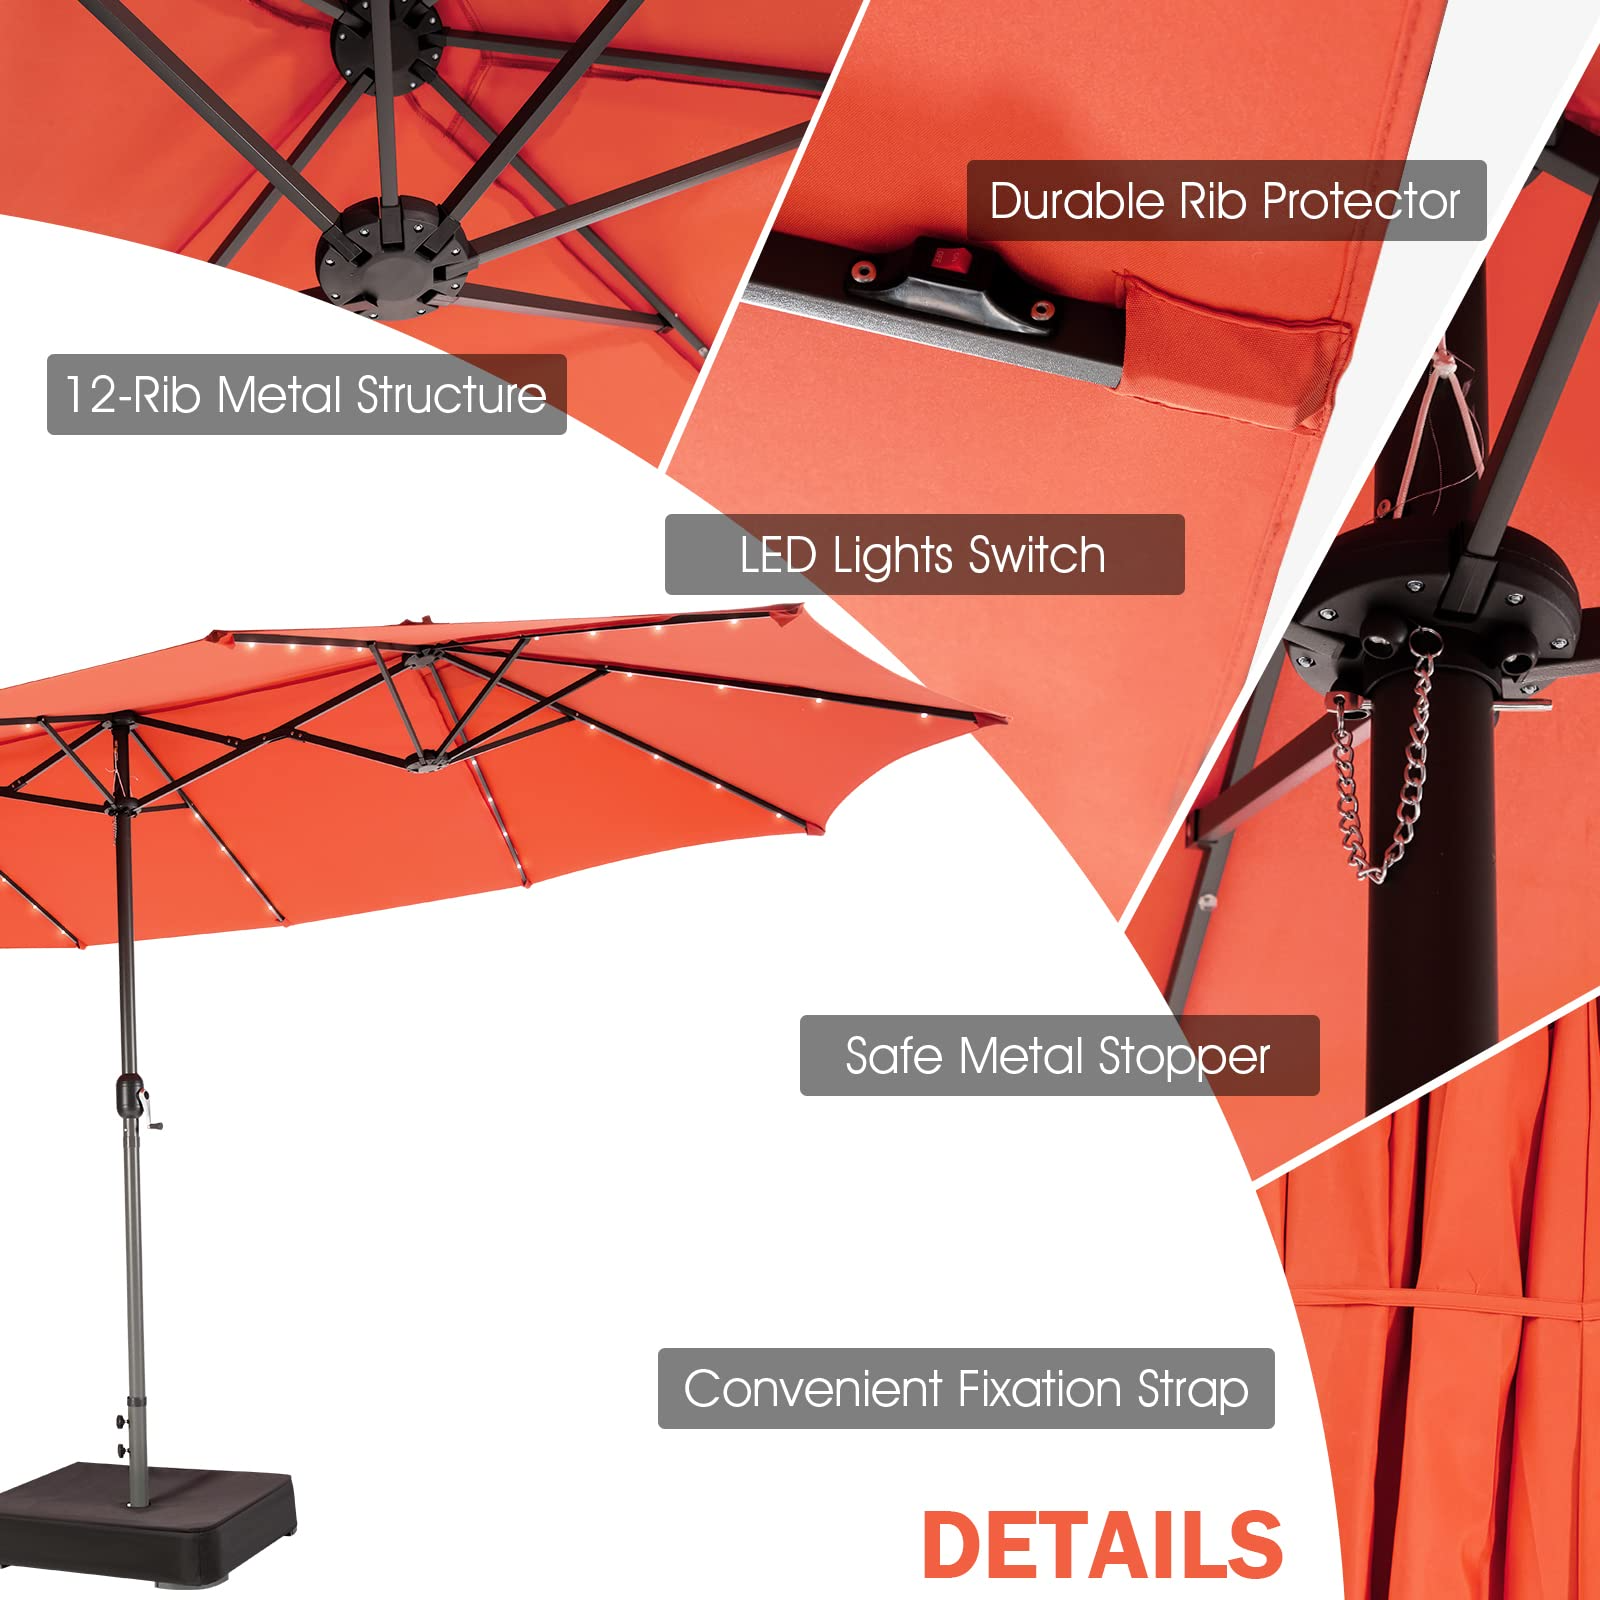 15ft Large Outdoor Umbrella Double-Sided, 48 Solar Lights, Auto-Charging Solar Panel